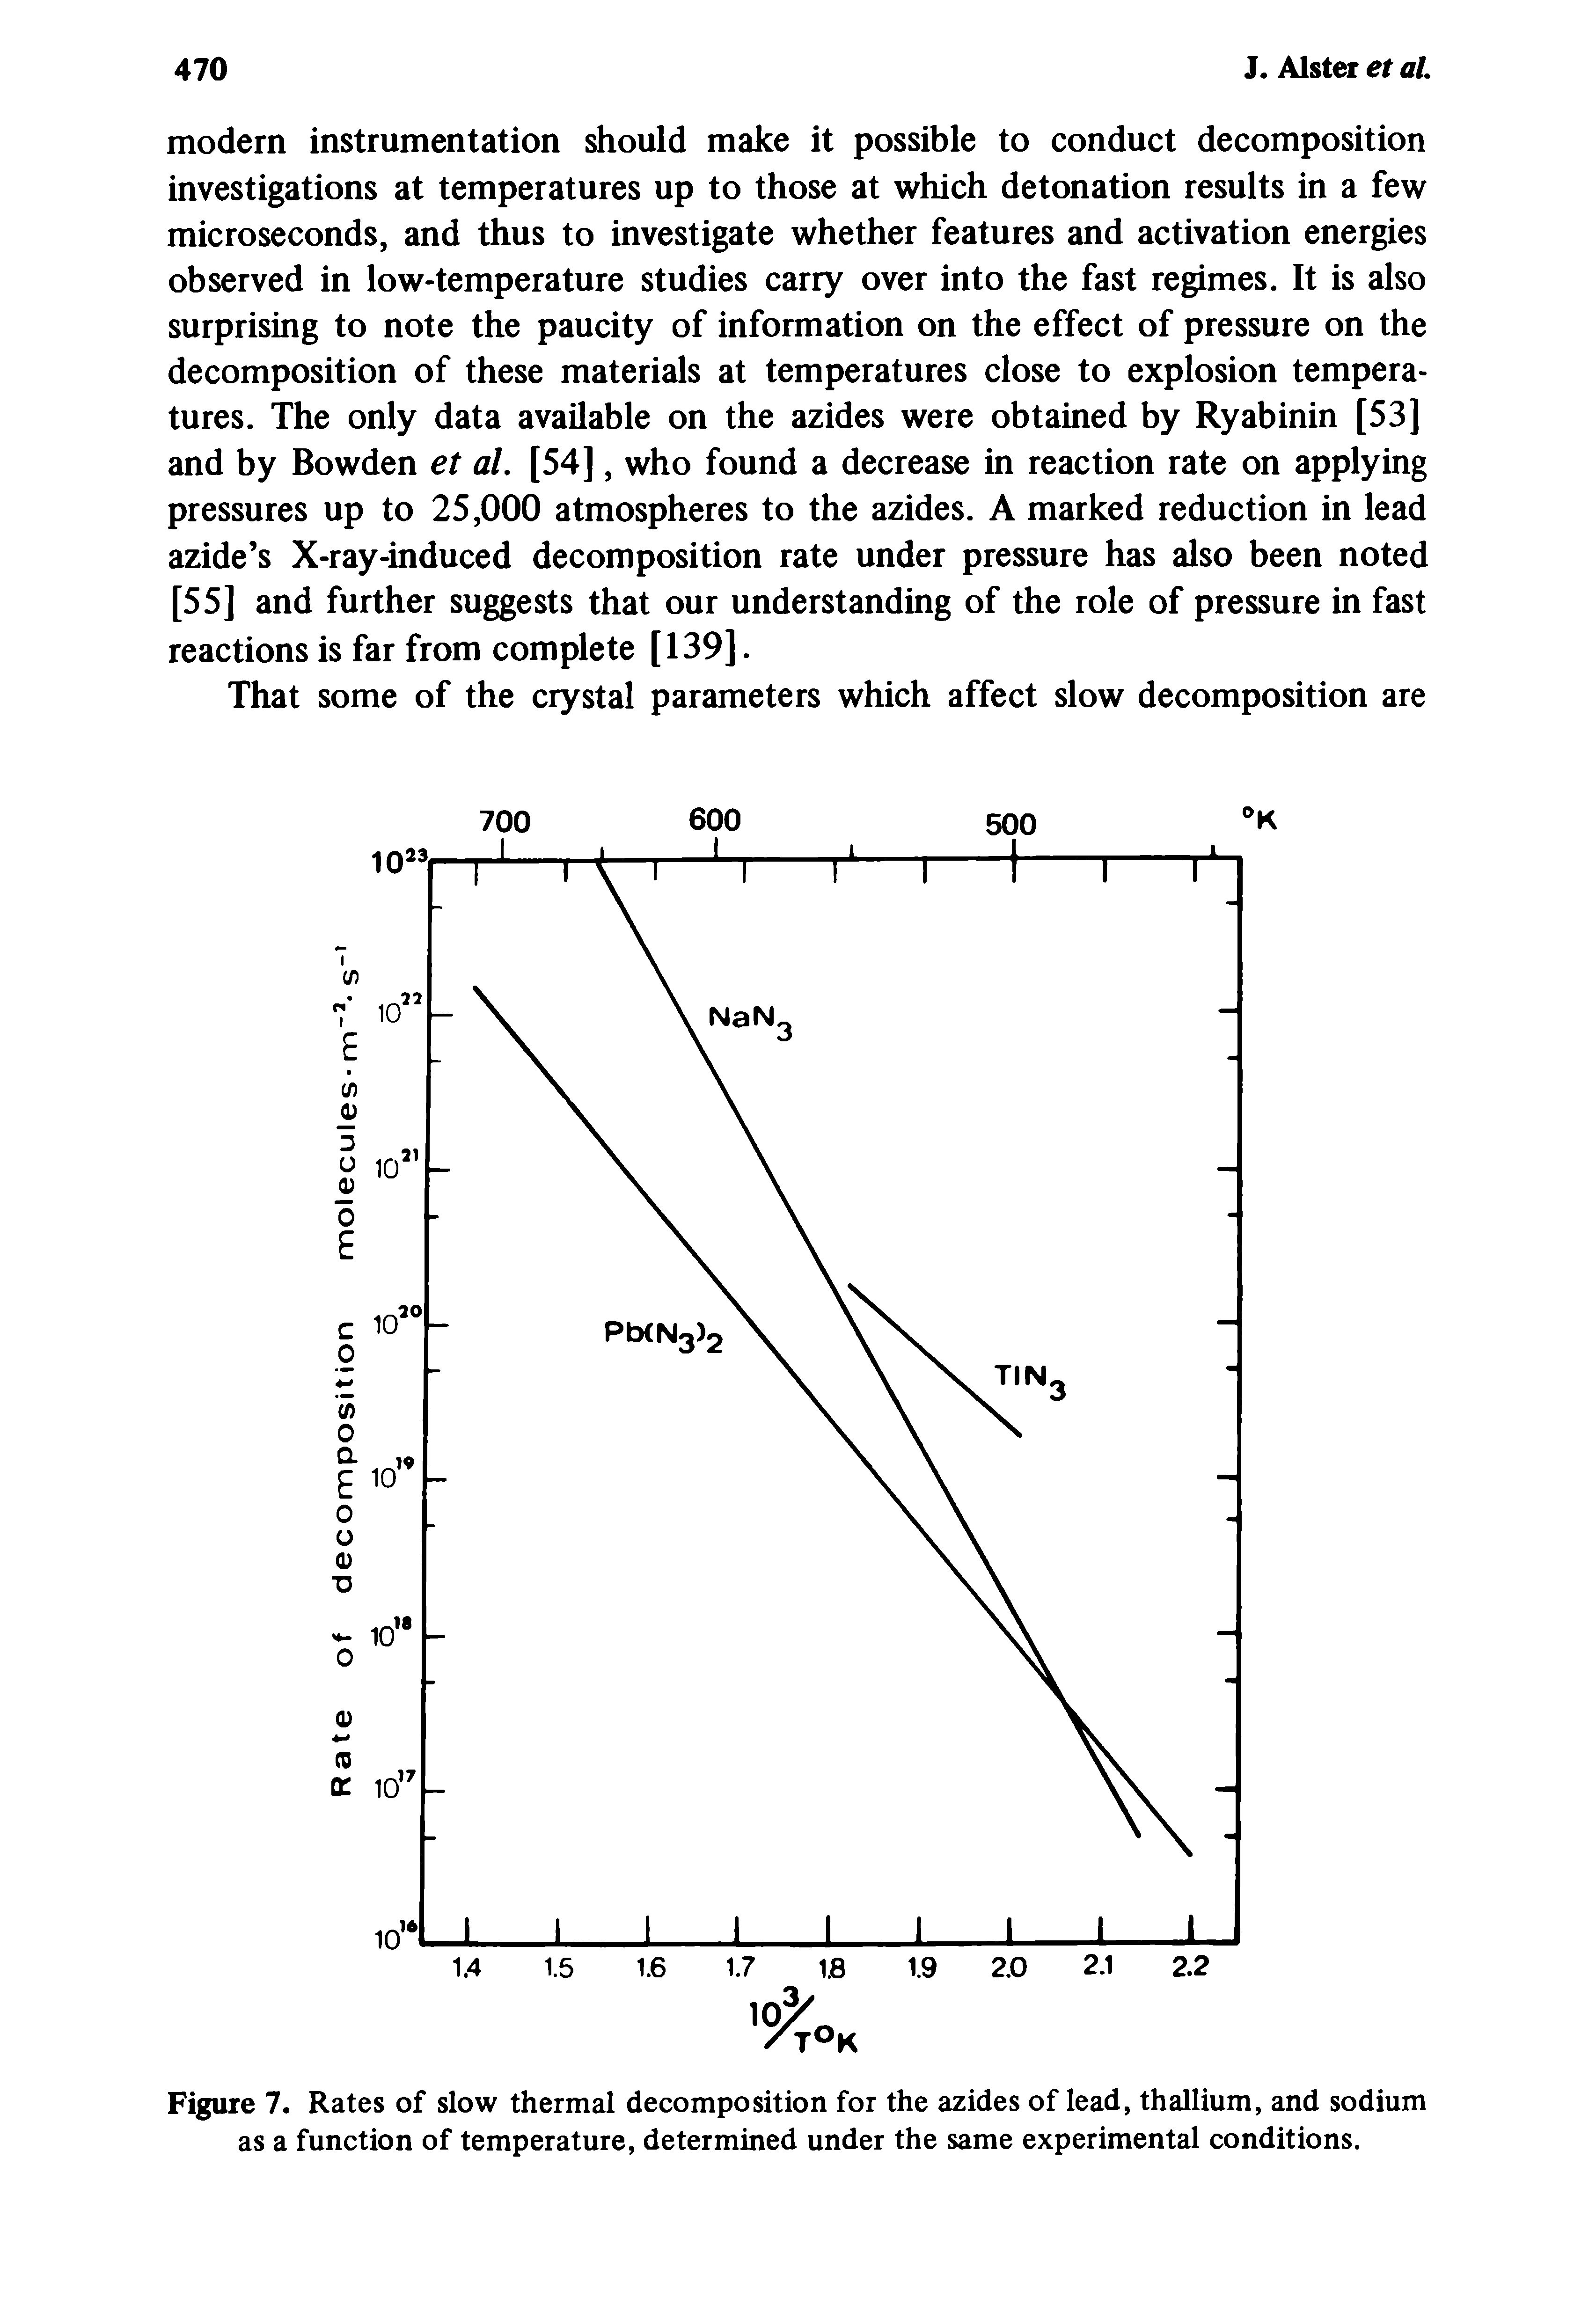 Figure 7. Rates of slow thermal decomposition for the azides of lead, thallium, and sodium as a function of temperature, determined under the same experimental conditions.